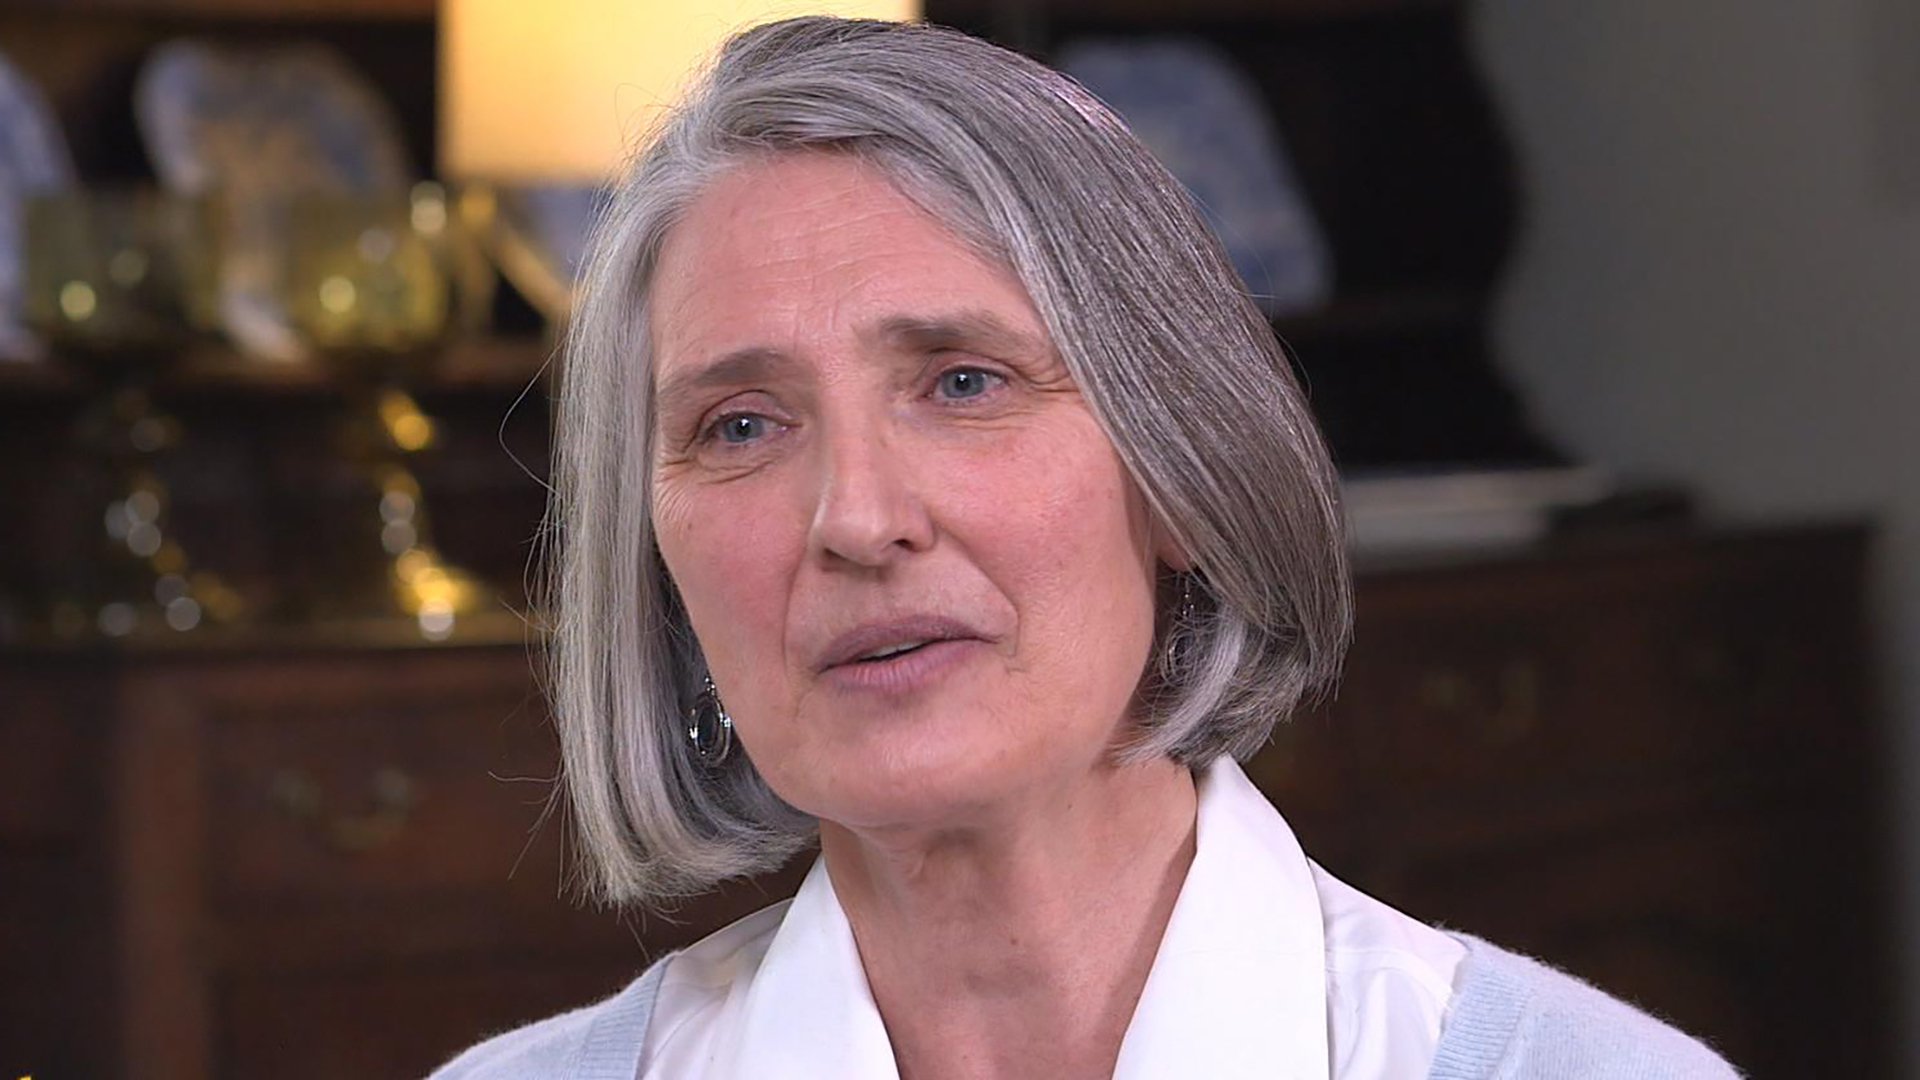 Author Louise Penny returns with 'A Great Reckoning' and new mysteries for  Chief Inspector Gamache to solve – Orange County Register